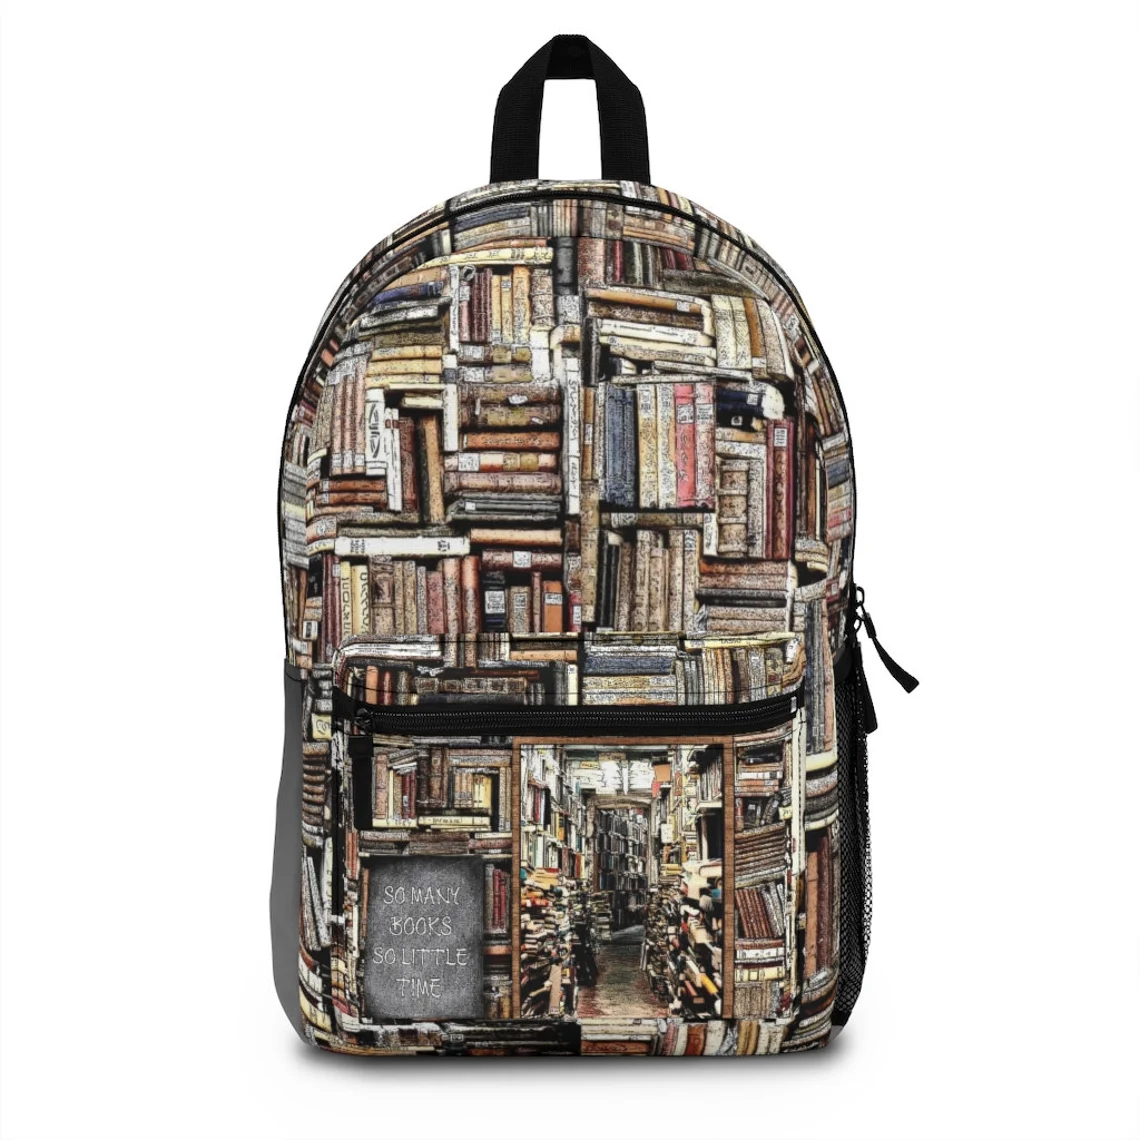 photo of a backpack decorated in illustrations of stacked books with the phrase "So many books, so little time" in the righthand 